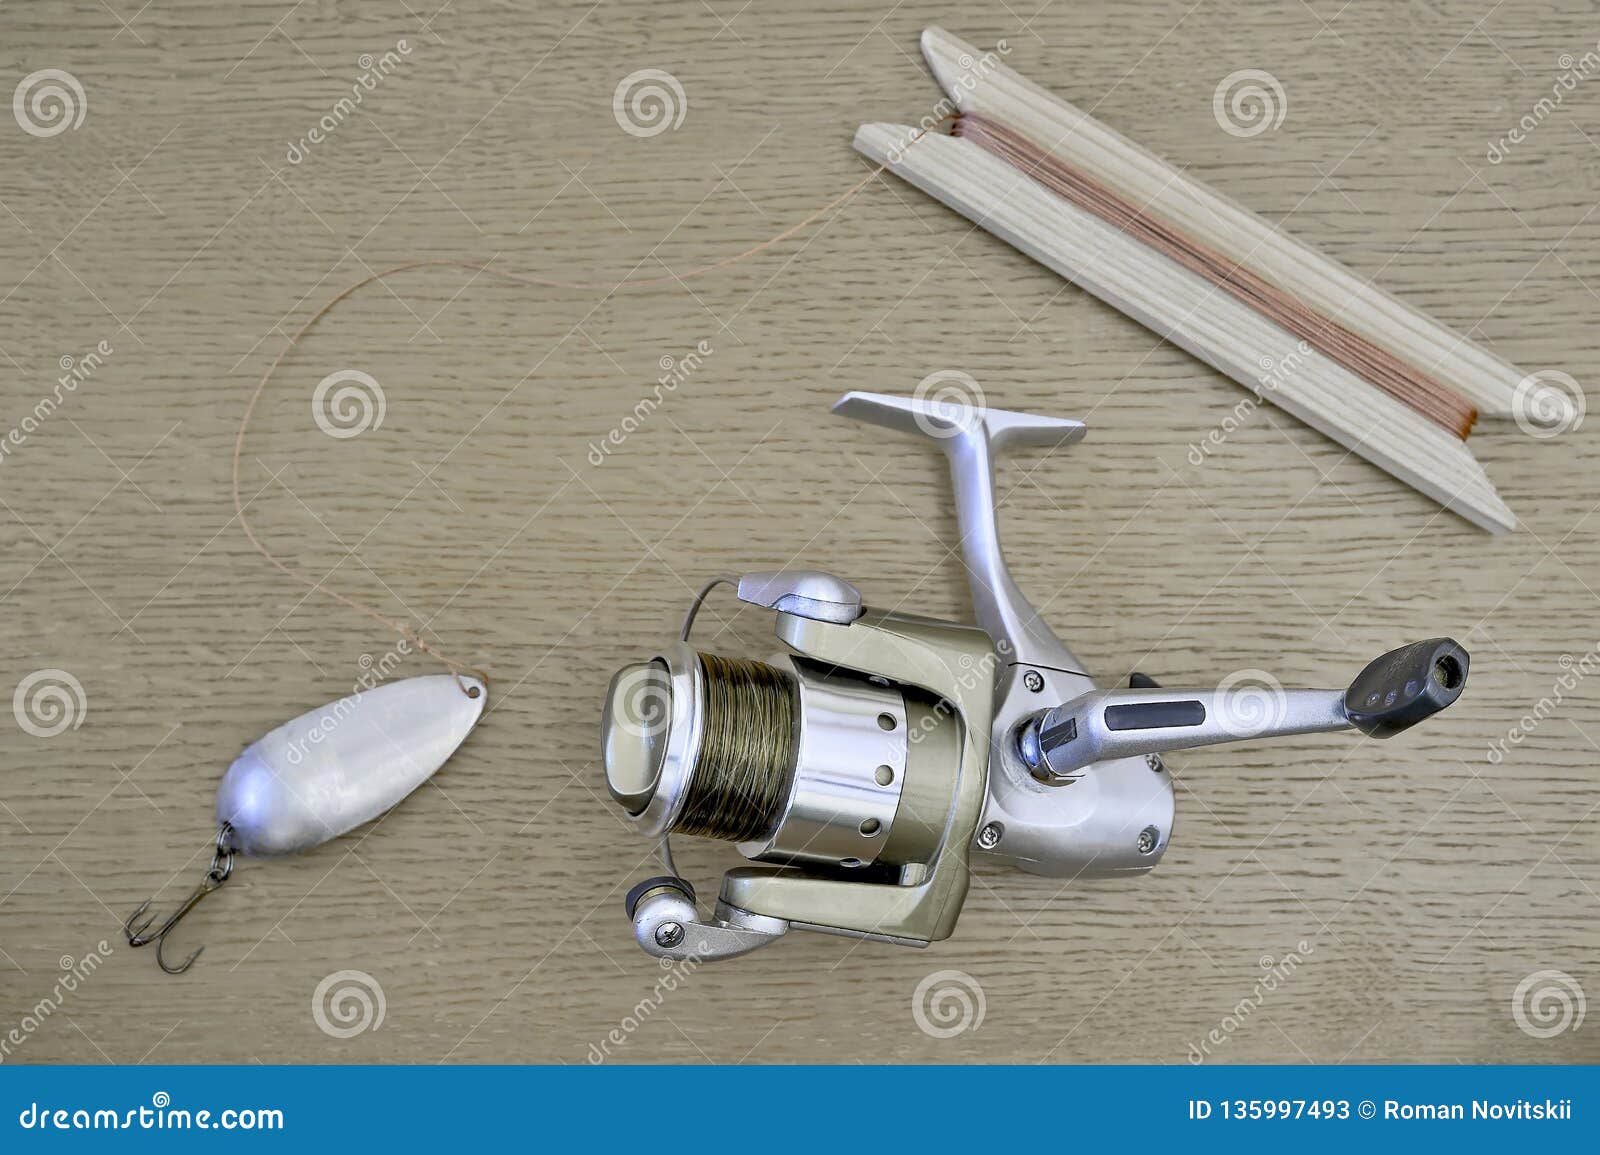 https://thumbs.dreamstime.com/z/modern-spinning-reel-fishing-line-homemade-spoon-cord-tied-to-wound-wooden-reel-modern-spinning-135997493.jpg